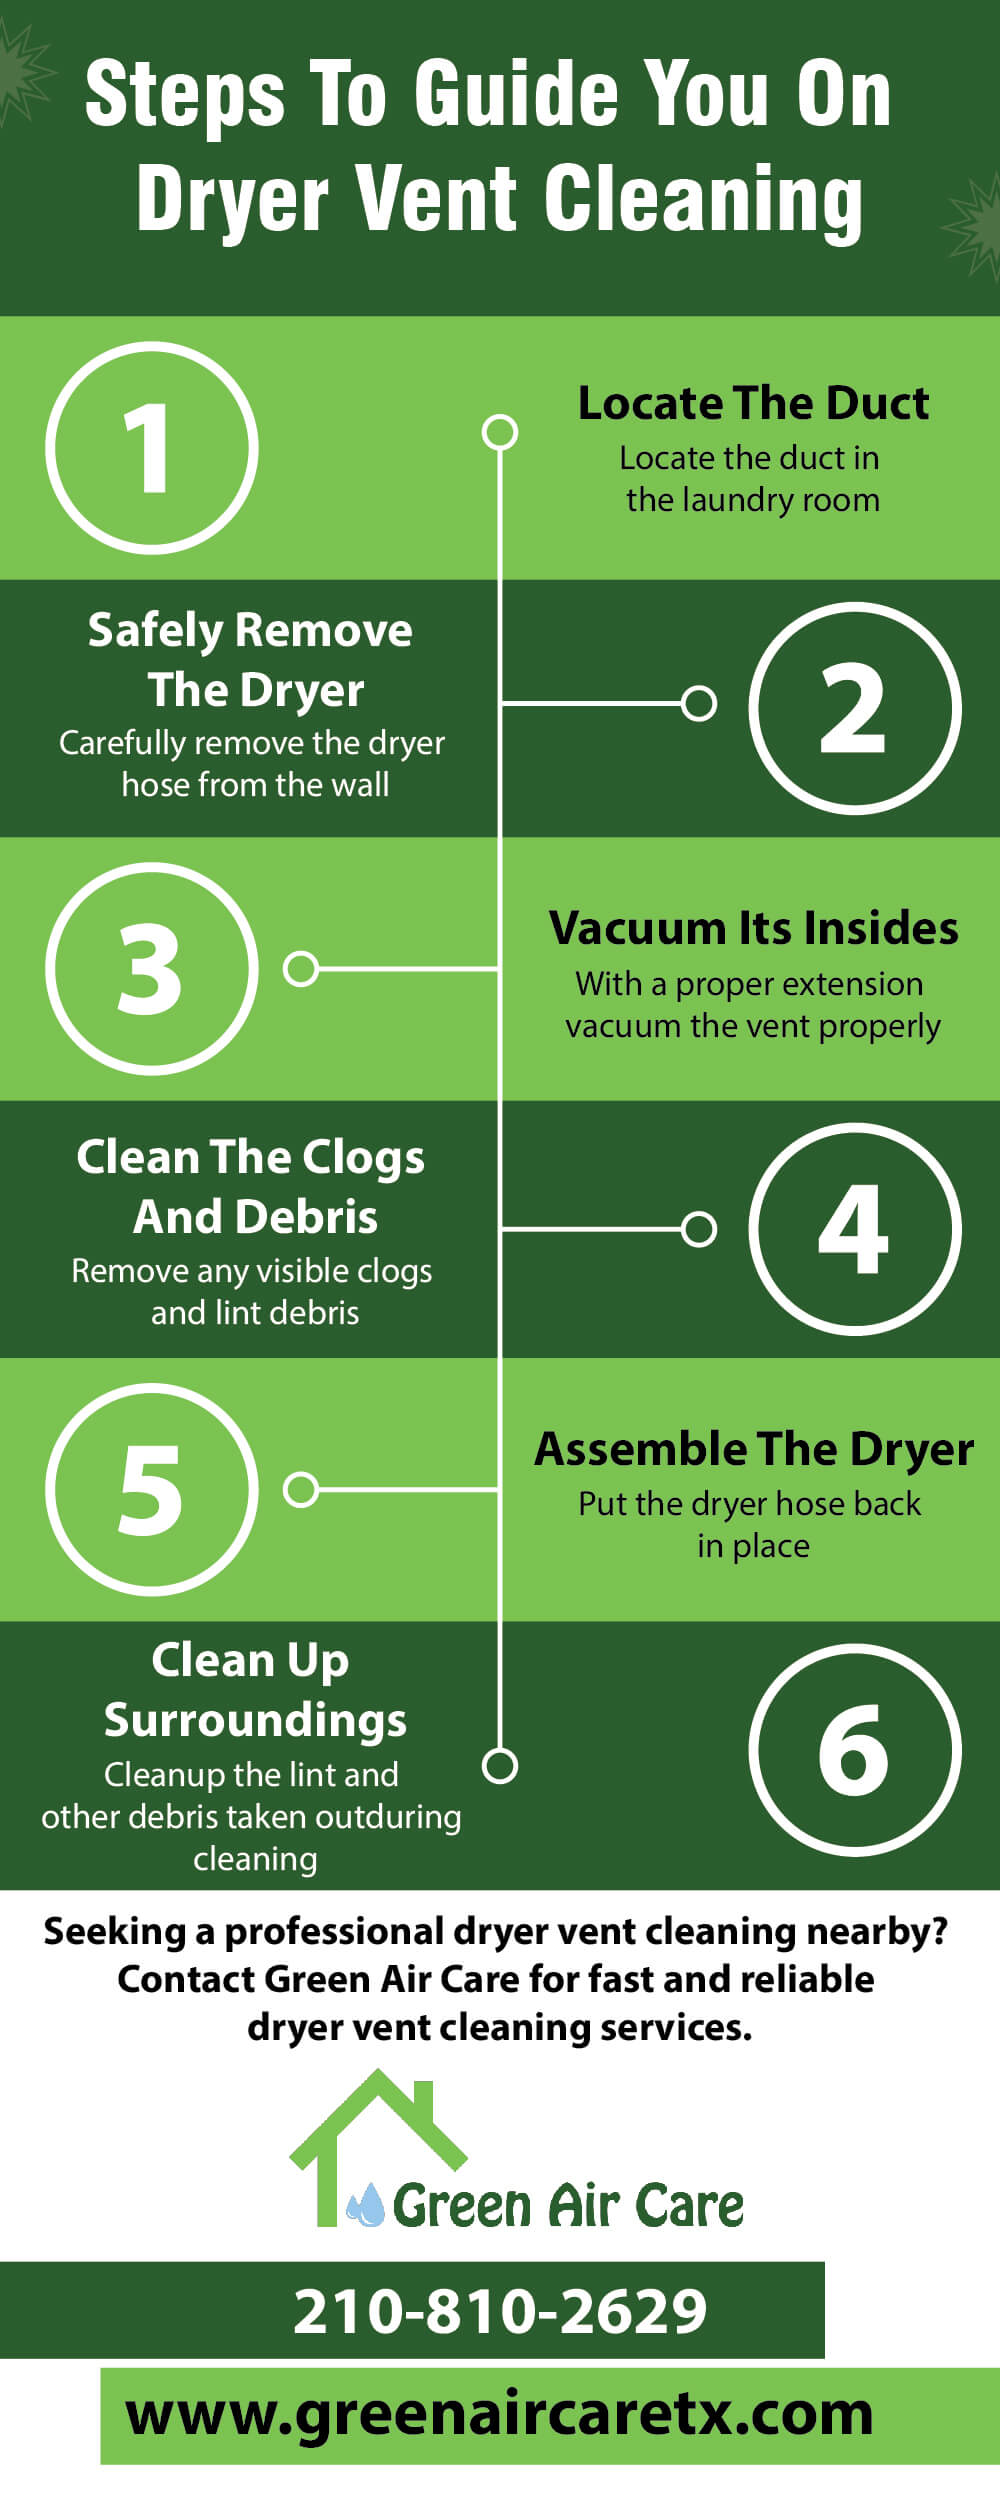 Steps To Guide You On Dryer Vent Cleaning